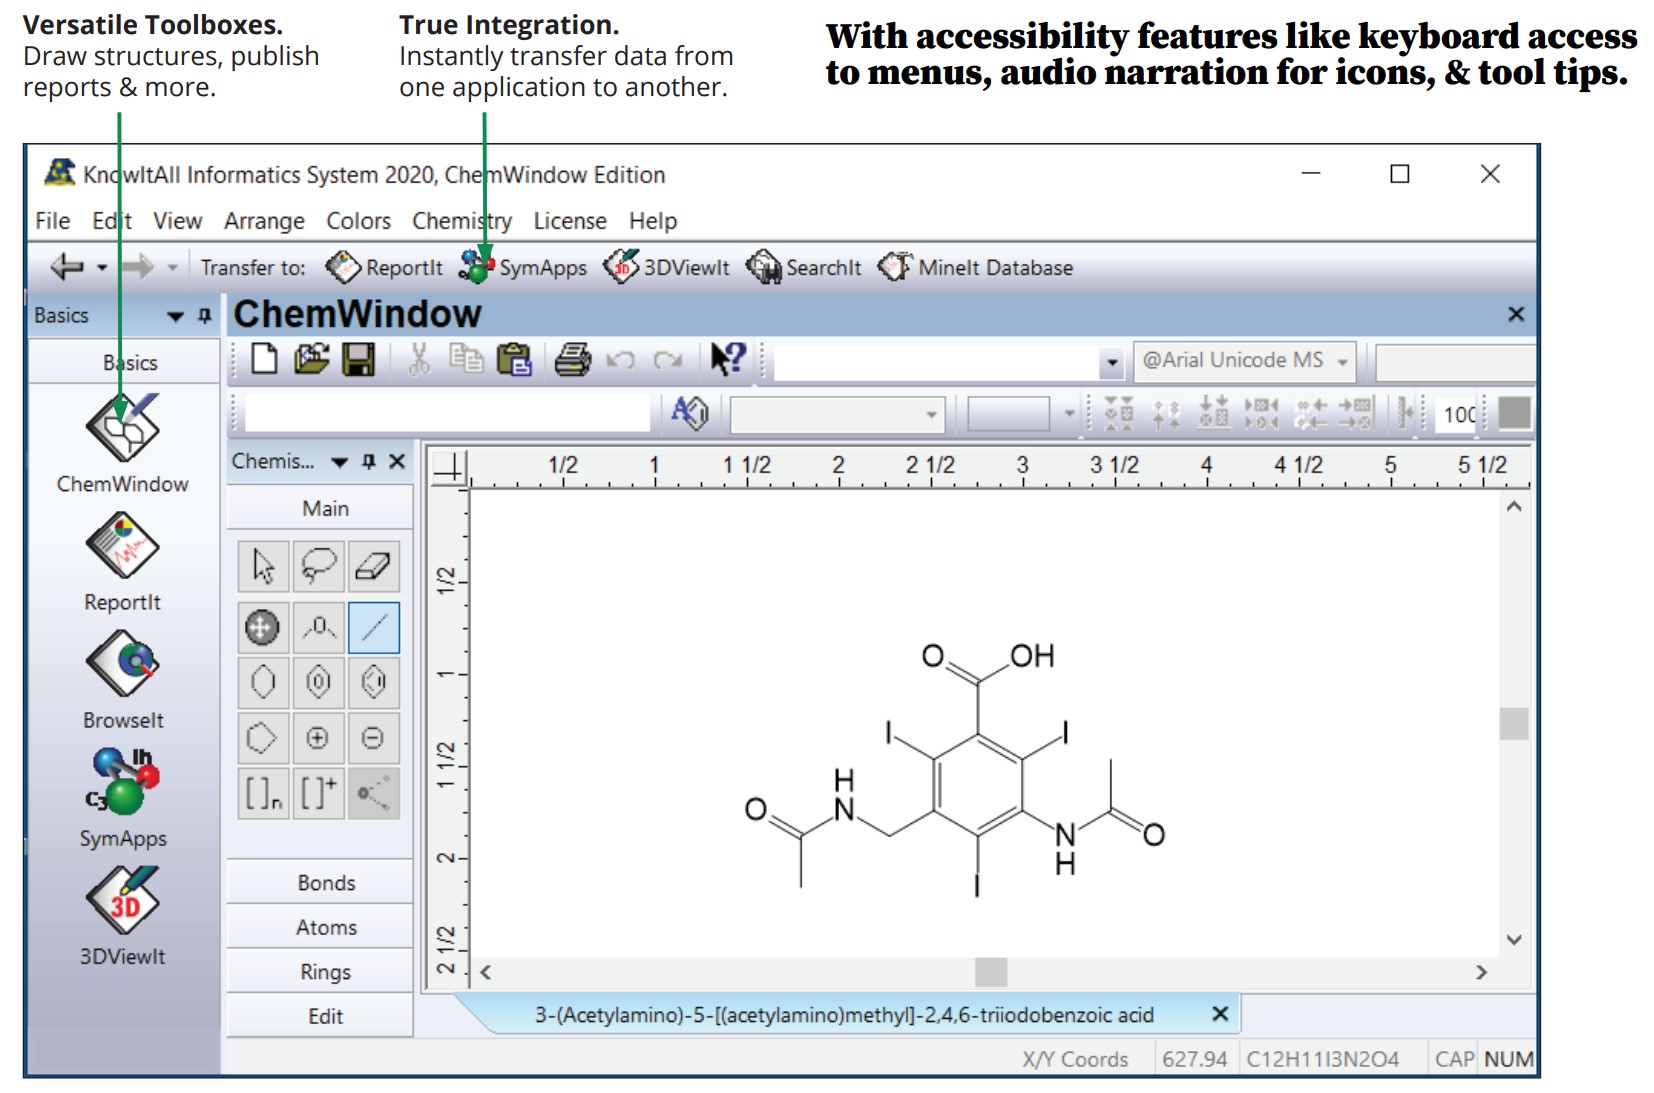 Wiley ChemWindow Chemical Structure Drawing Software